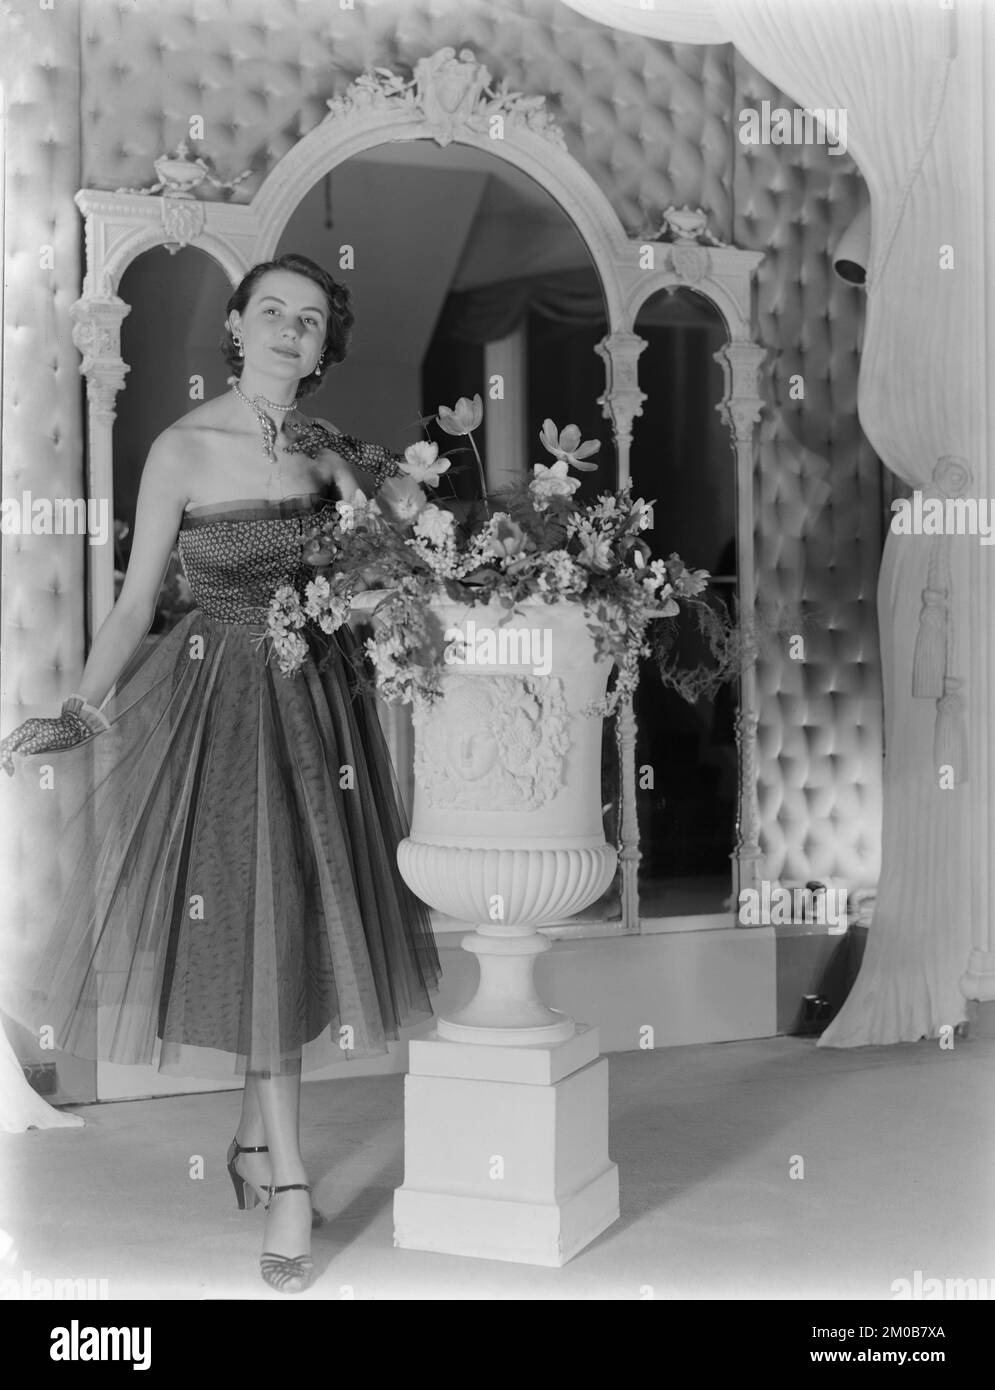 A model working for the Alexandrine Fashion and Model House in Nottingham, England, during the 1950s. She is posing in a studio, wearing one of Alexadrine's latest designs. Stock Photo